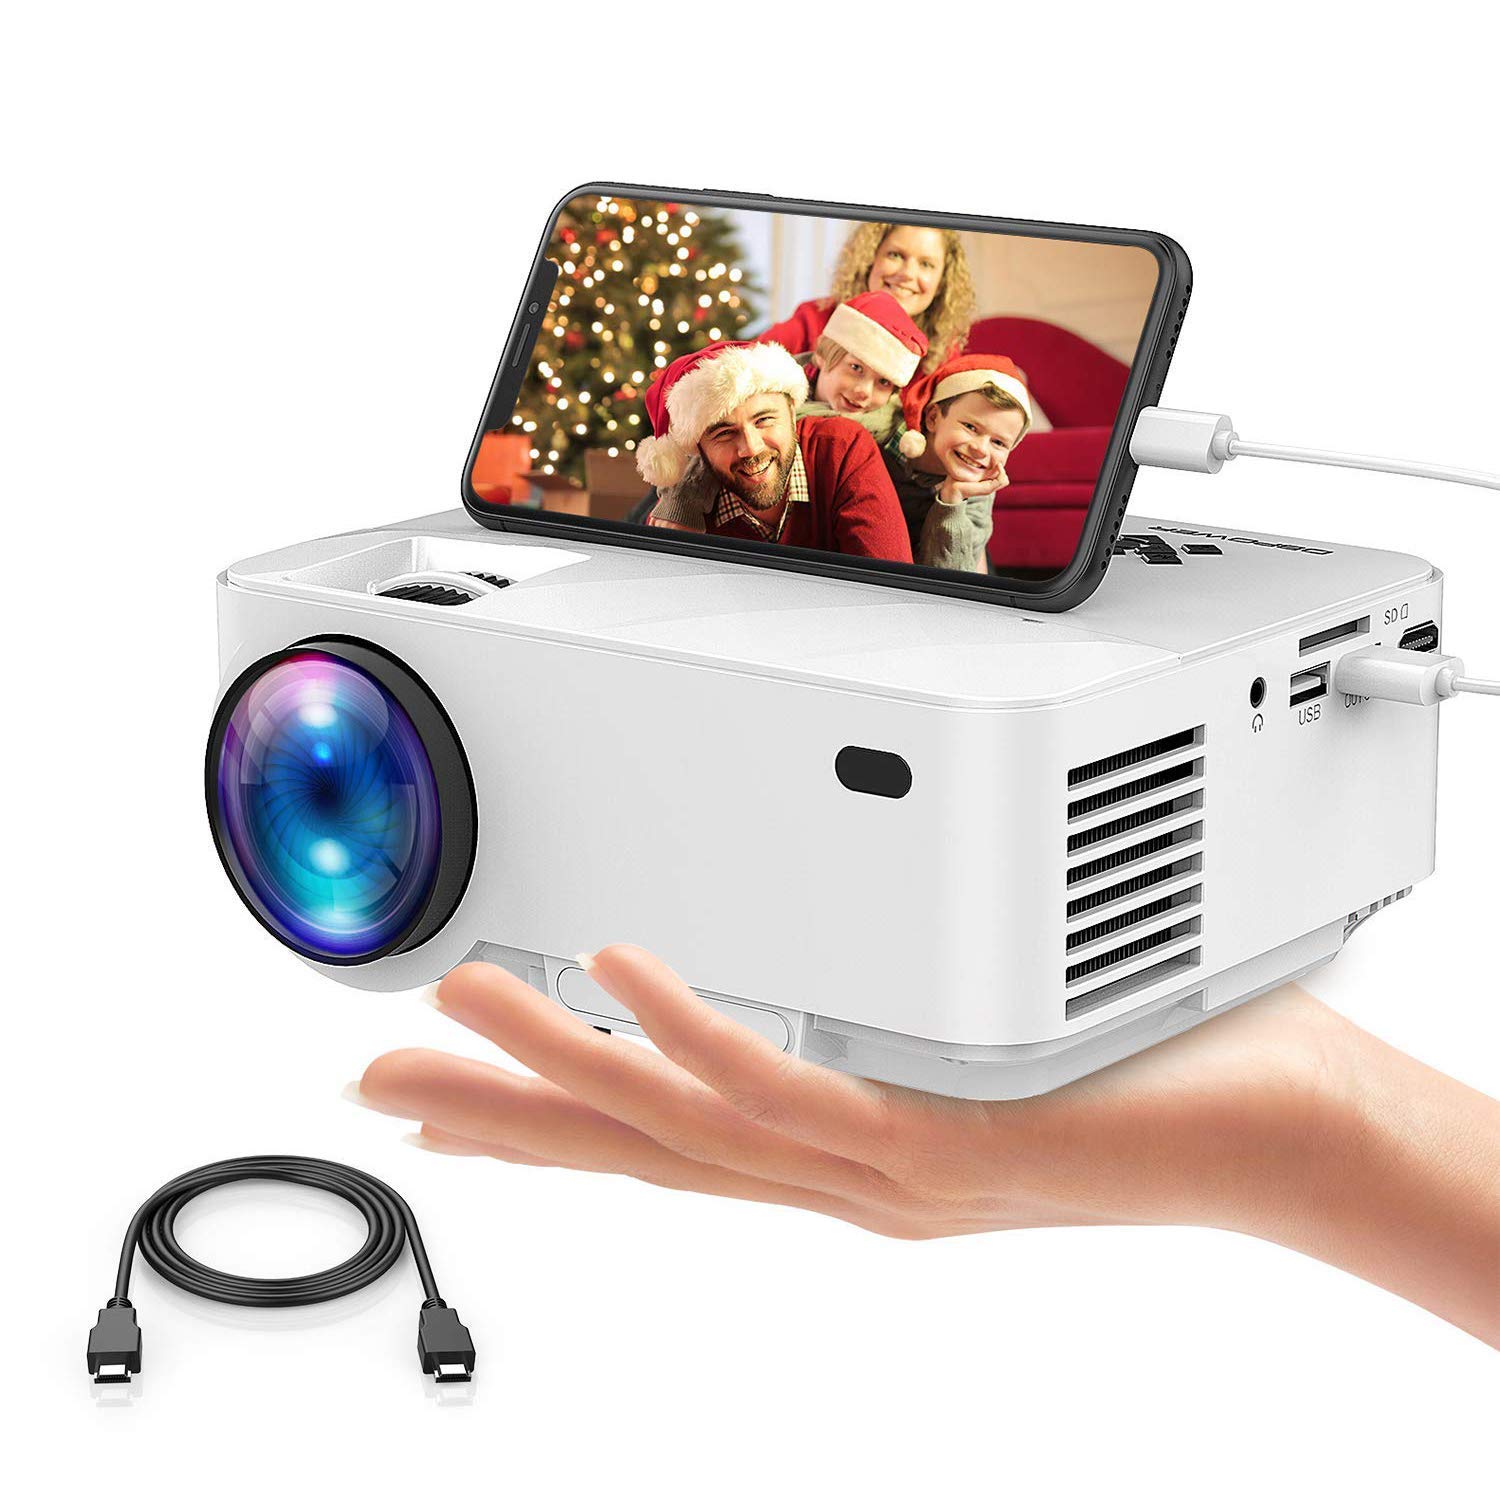 Mini Projector, DBPOWER 2400Lux Synchronizing Smartphone Screen Portable Movie Projector, Video Projector for Home Theater, 1080P/HDMI/VGA/USB/TV Box/Laptop/DVD/External Speaker Supported